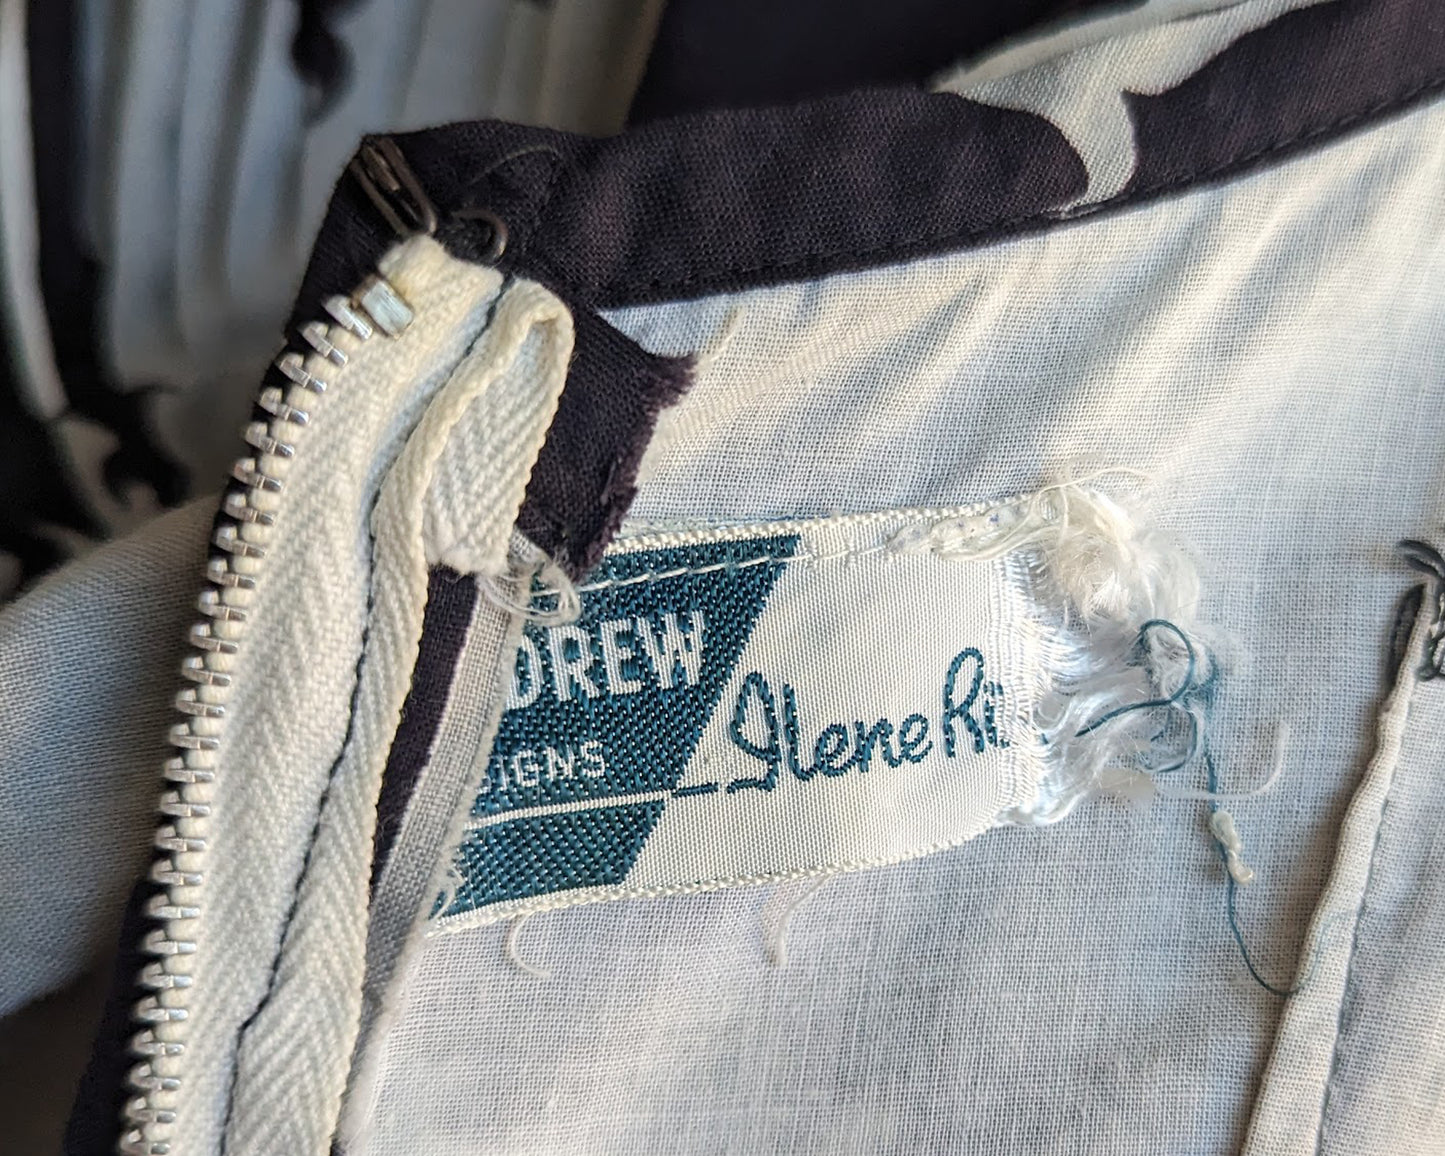 Close up of the label which should say Tom Drew Designs Ilene Ricky (tag is frayed)